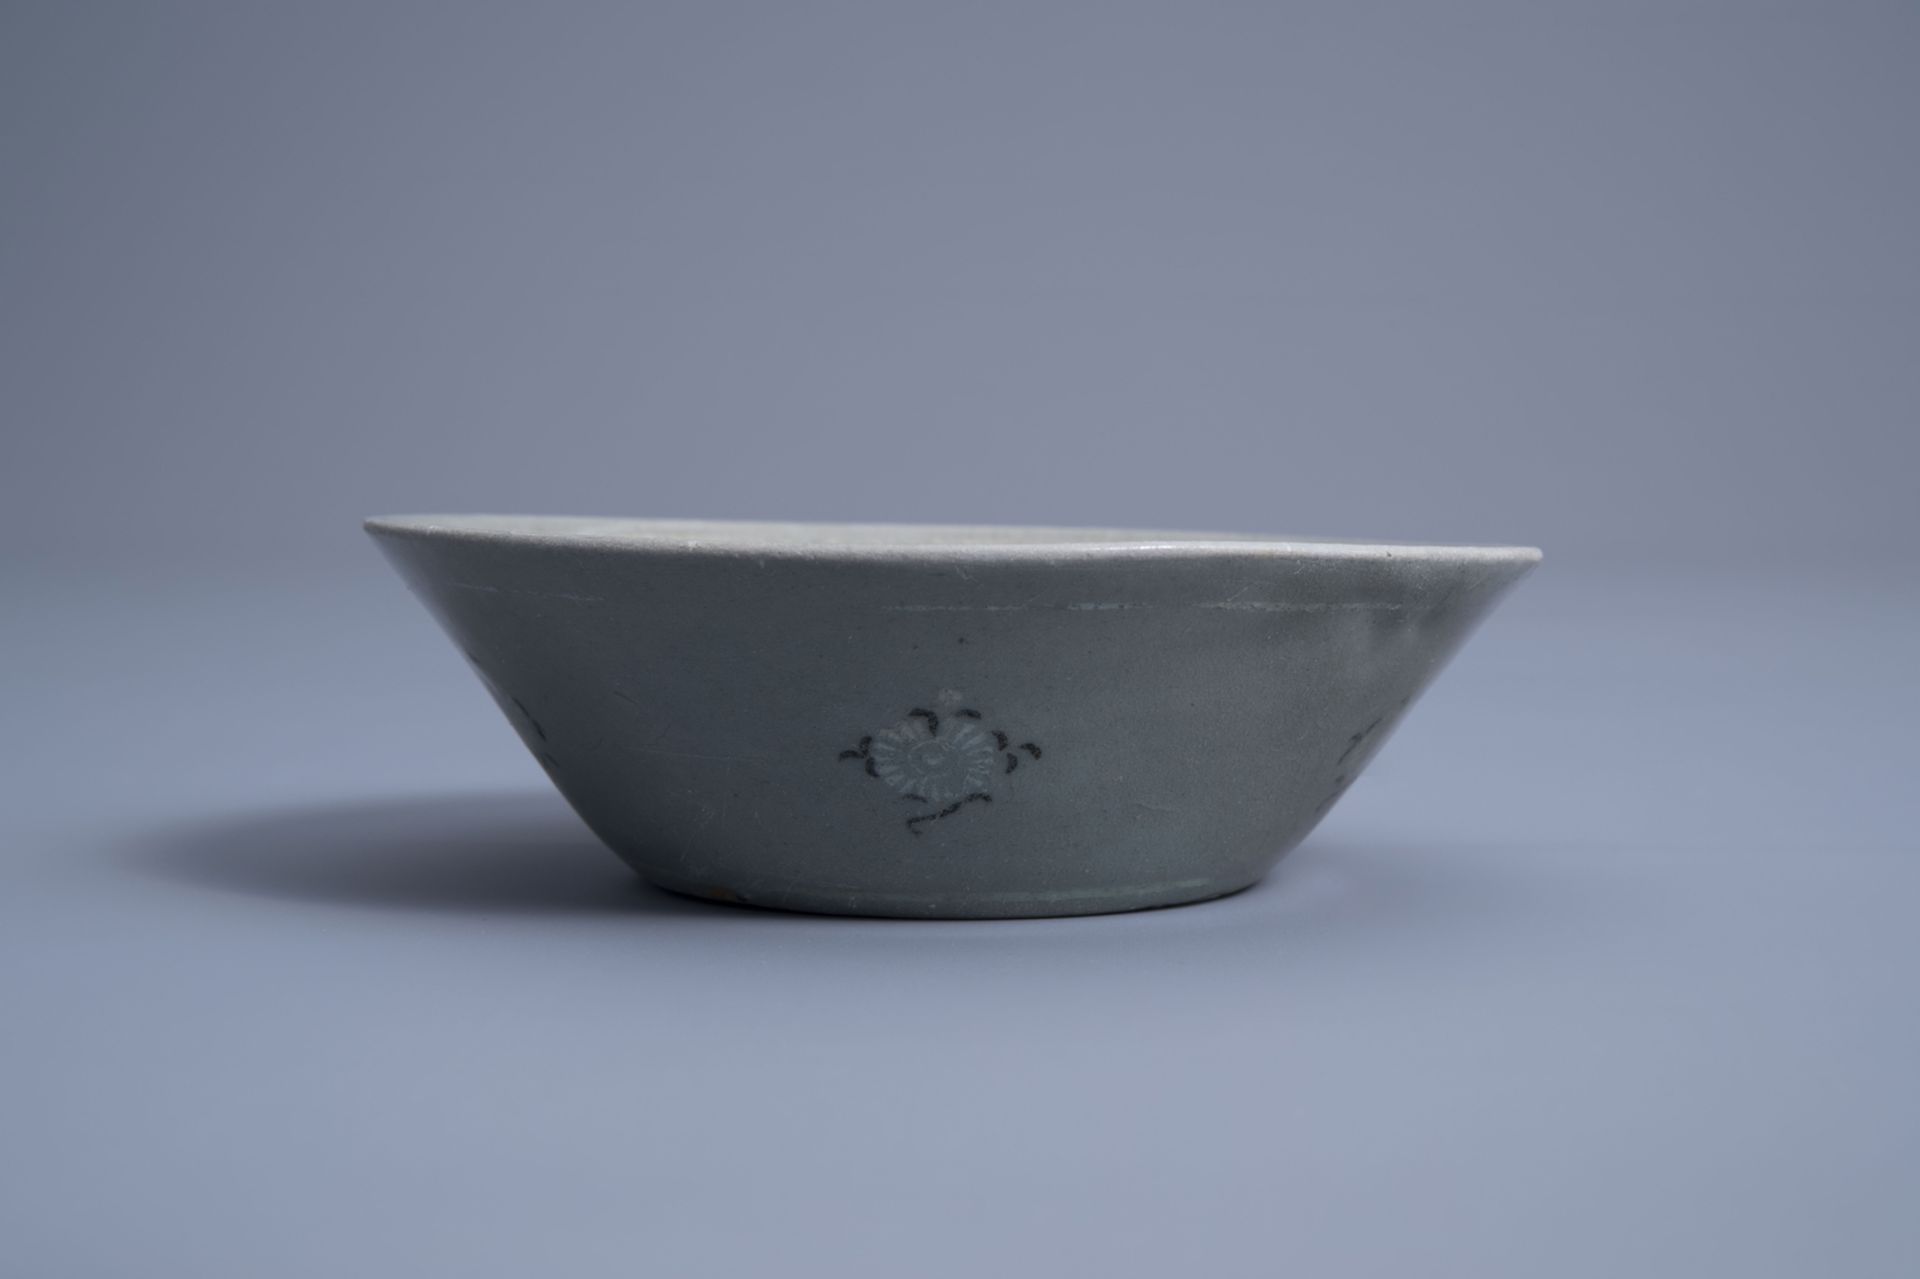 A Korean celadon bowl with ornamental design, probably Goryeo/Joseon, 14th/15th C. - Image 3 of 6